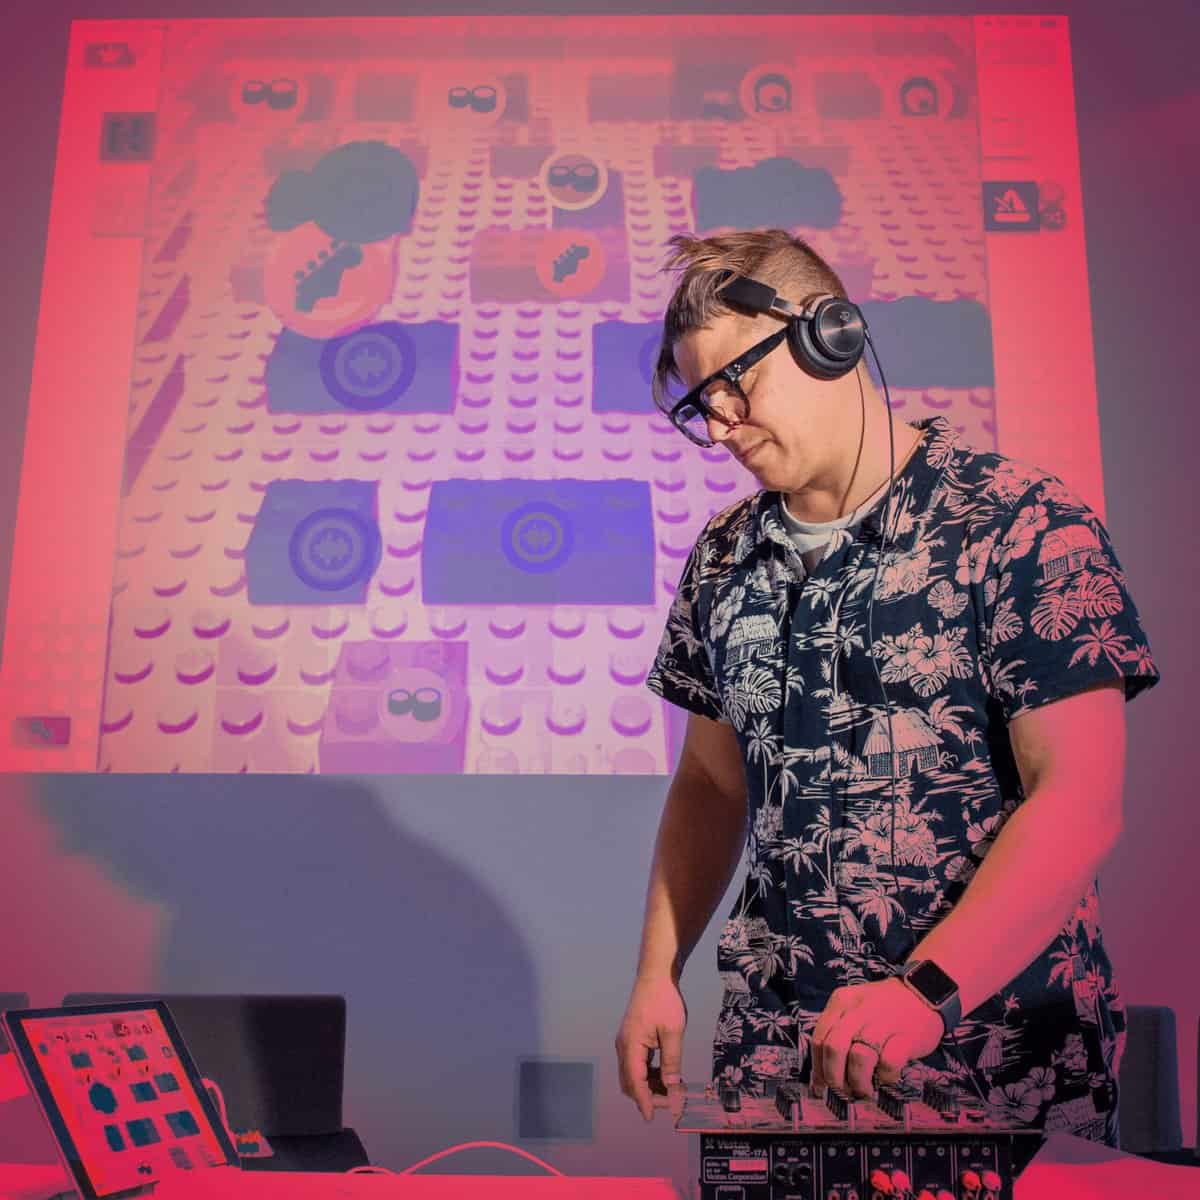 A DJ standing over his decks, red tint over image.